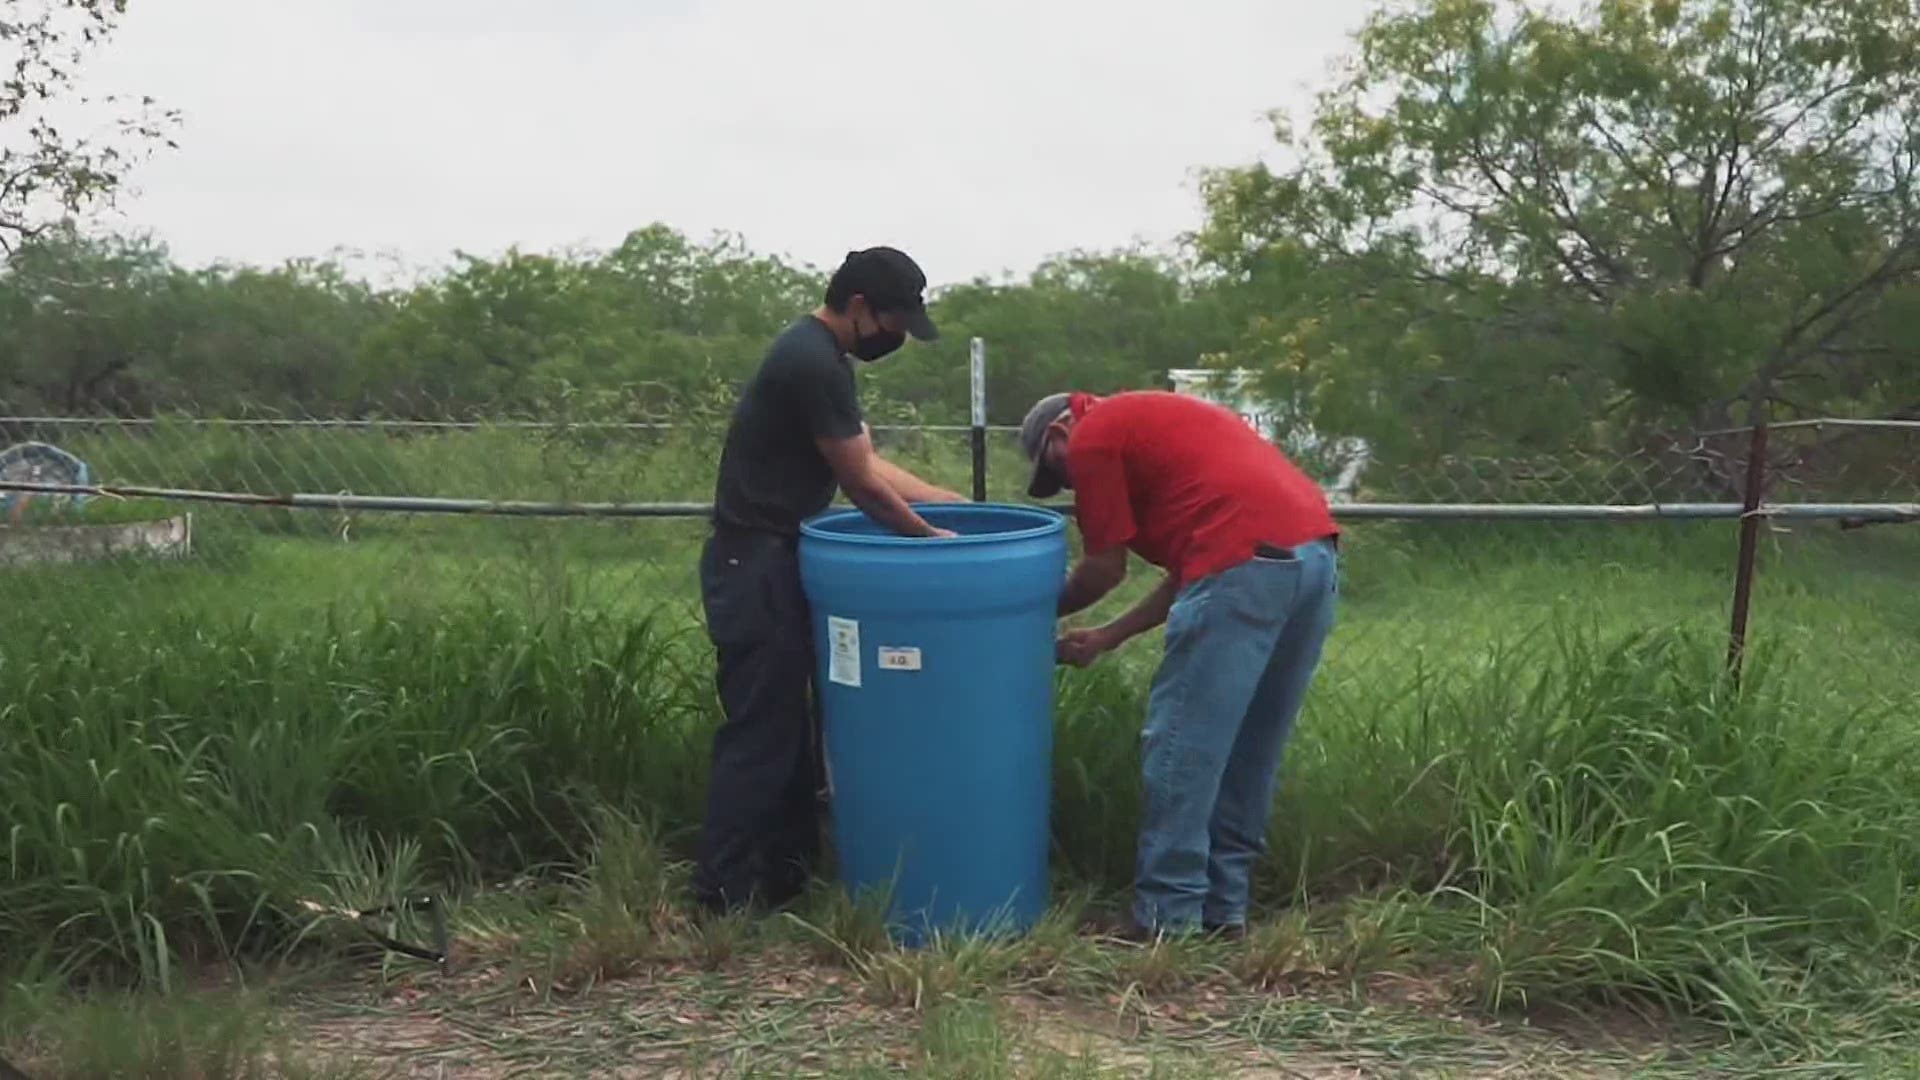 A nonprofit group is adding new water stations at the border in Brooks County to help keep migrants from dying in the heat.